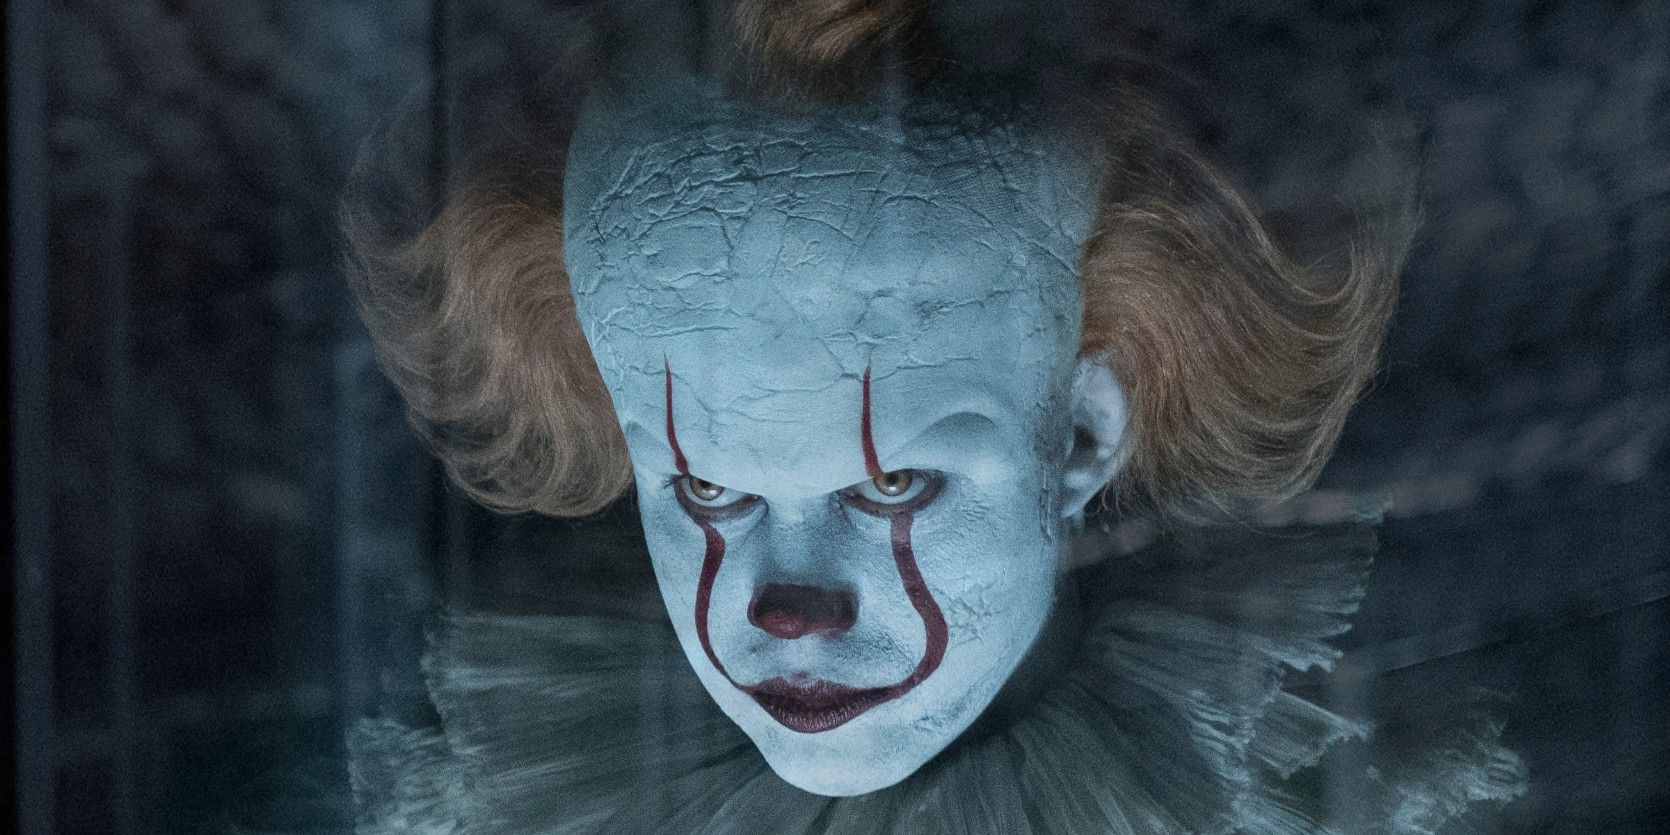 2019 Proved To Be A Mixed Year For Stephen King Movies